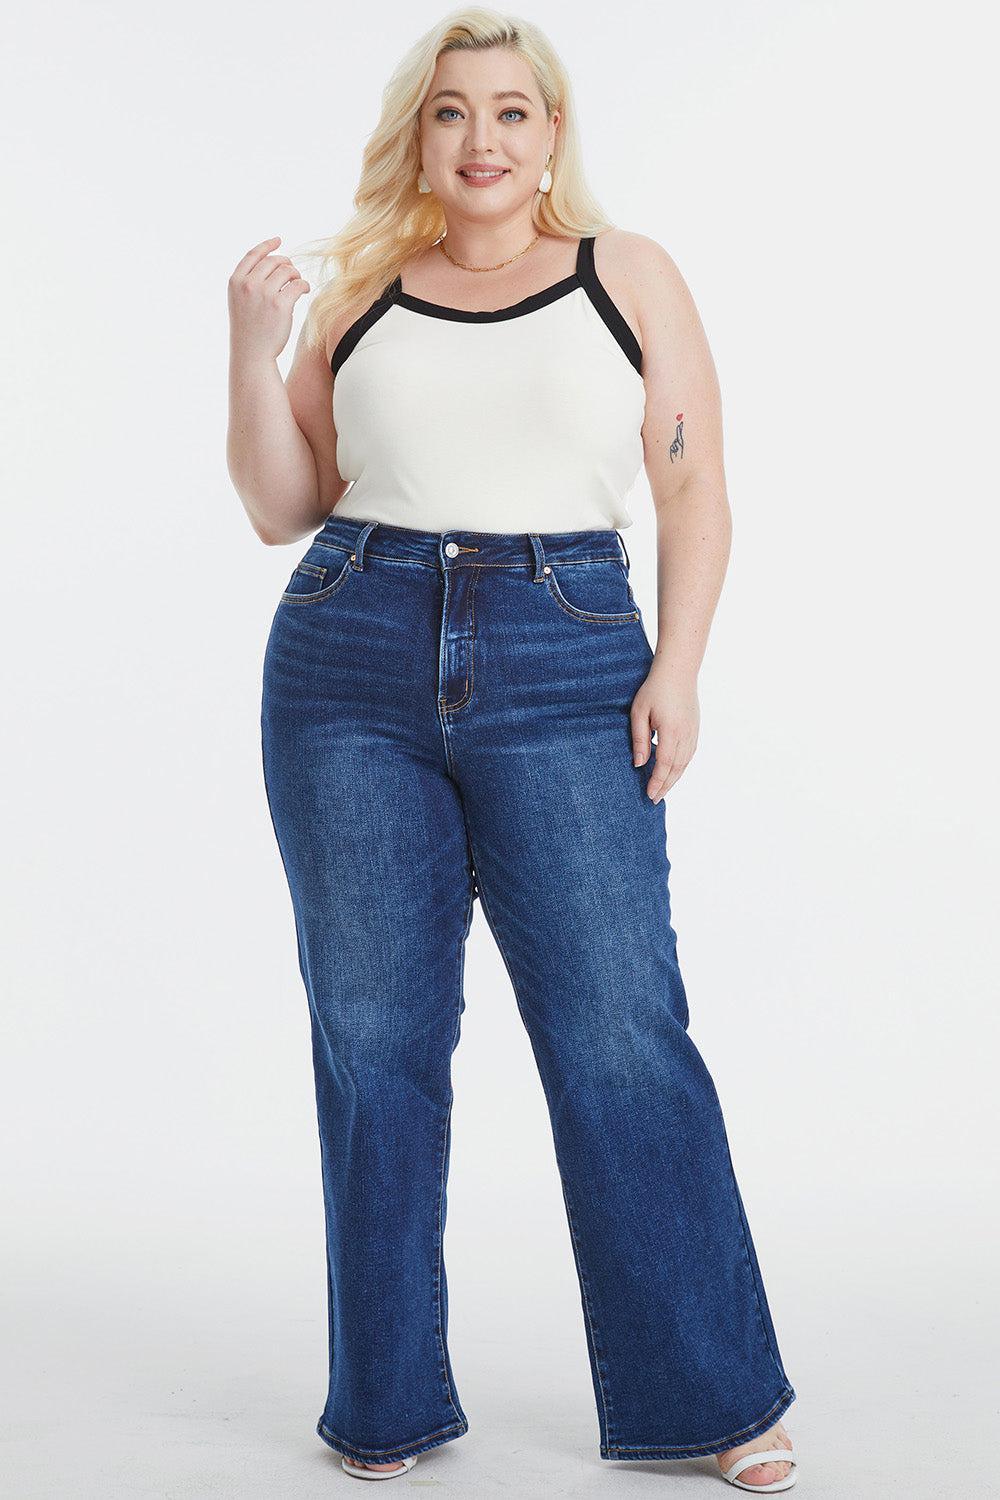 a woman in a white top and blue jeans